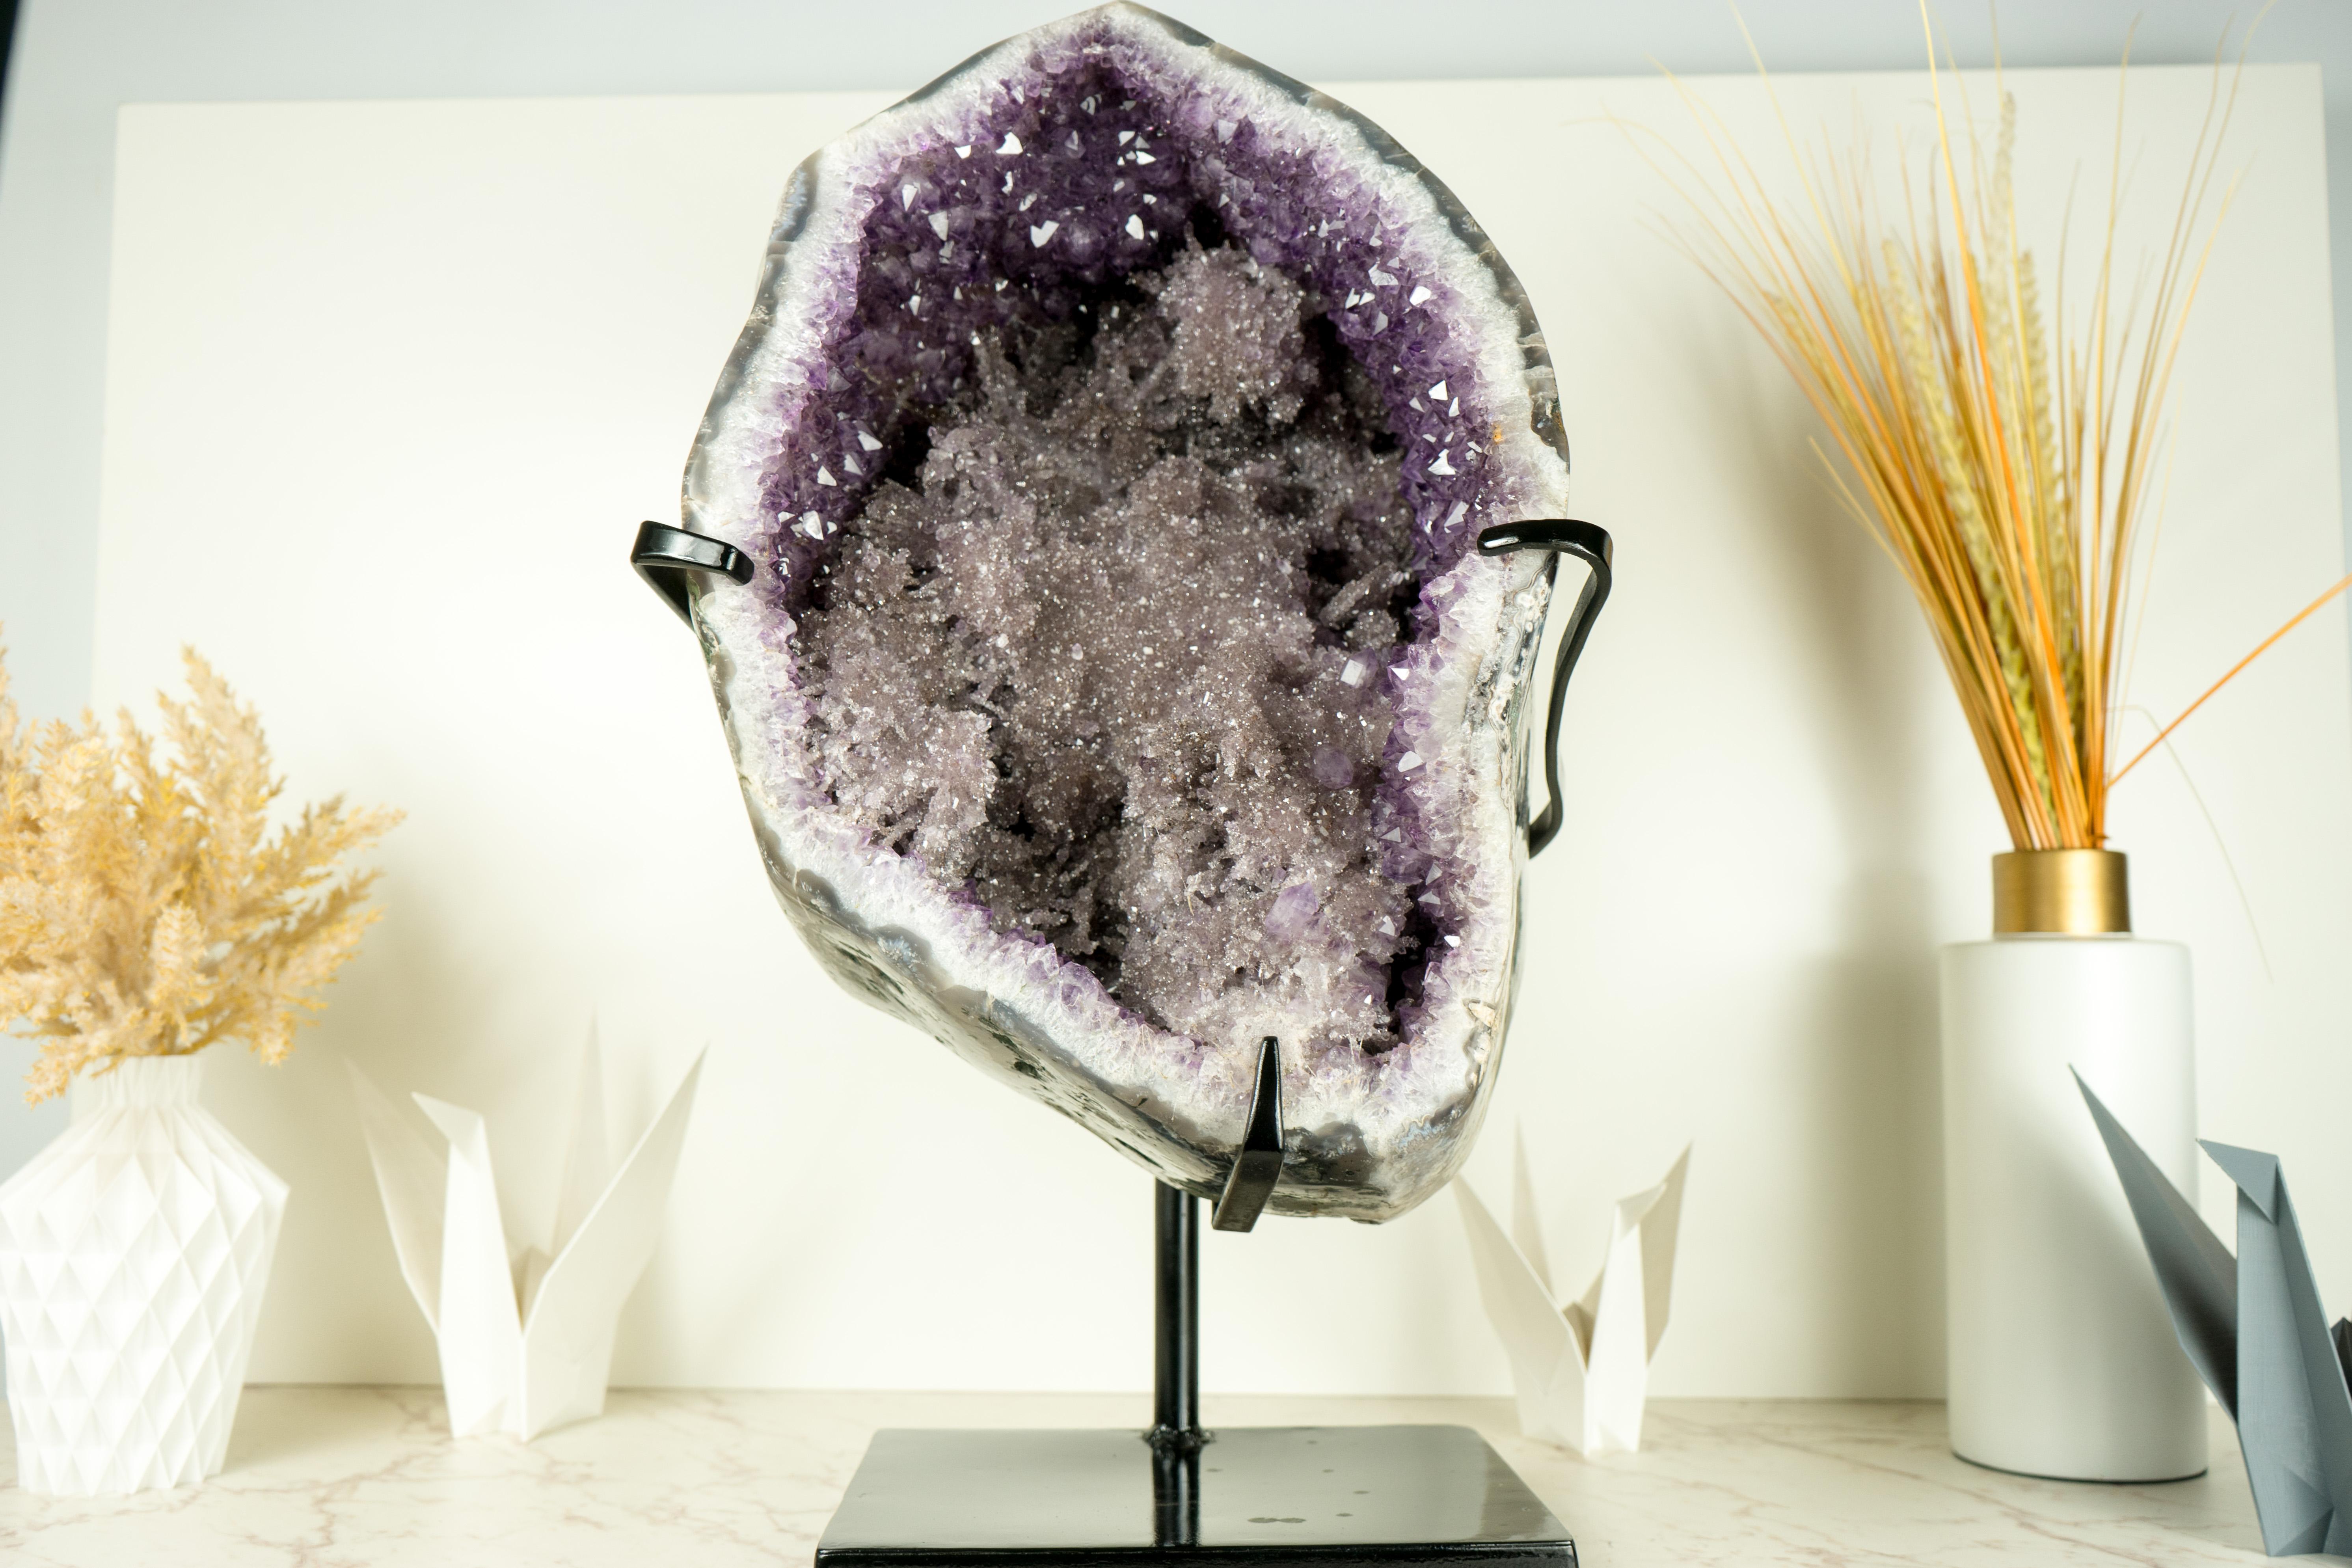 Exceptional Amethyst Geode with a Rare Beauty, with Hermiker Diamond Clarity: Nature's Artpiece that Formed in a Geode

▫️ Description

An Amethyst geode that stands as a true collector's piece, this specimen features a rosette of crystals with